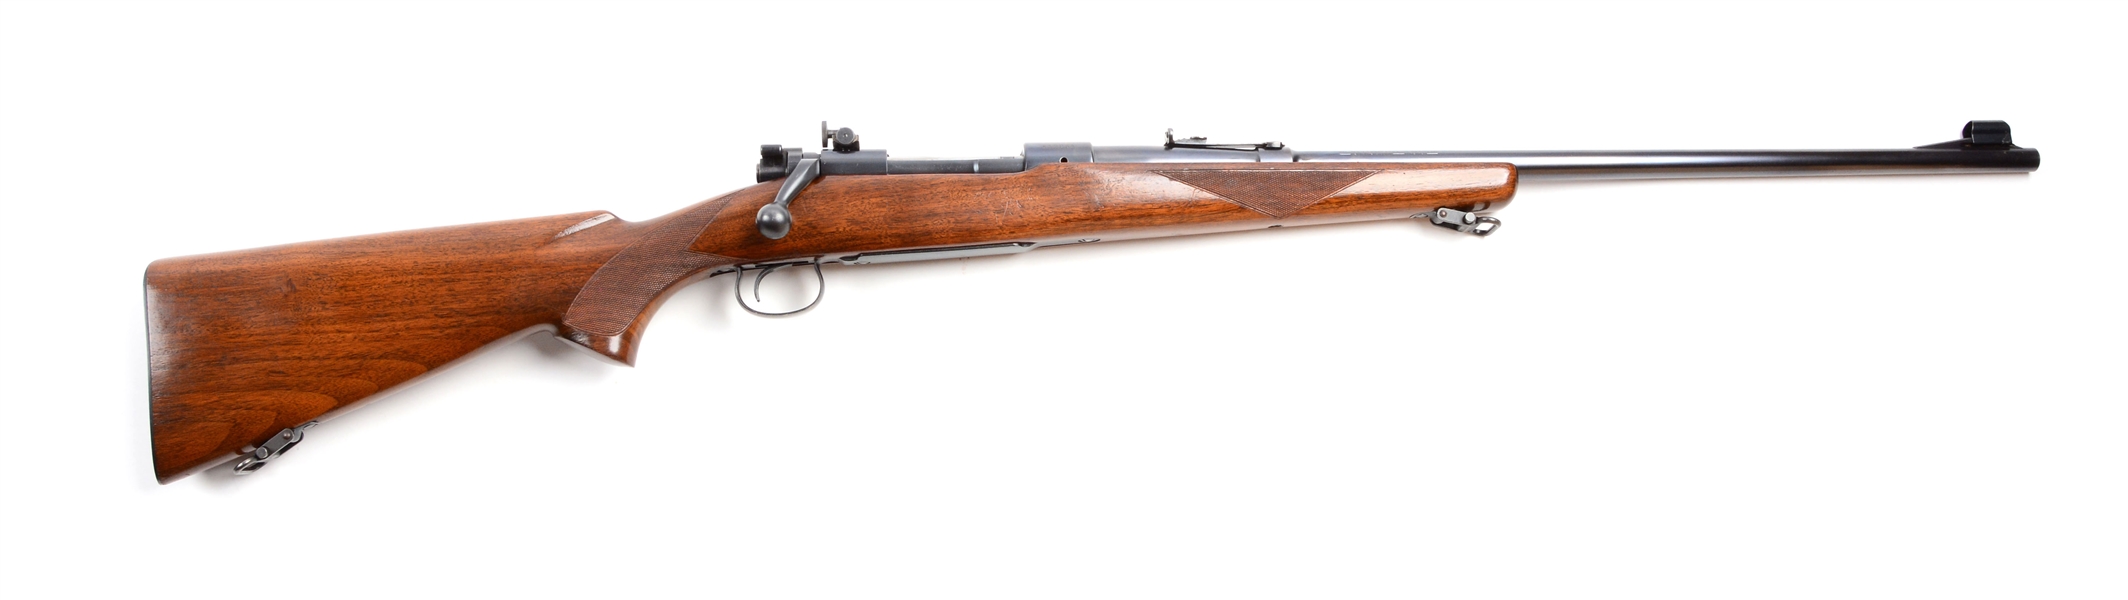 (C-) HIGH CONDITION WINCHESTER MODEL 54 BOLT ACTION SPORTING RIFLE IN .22 HORNET.